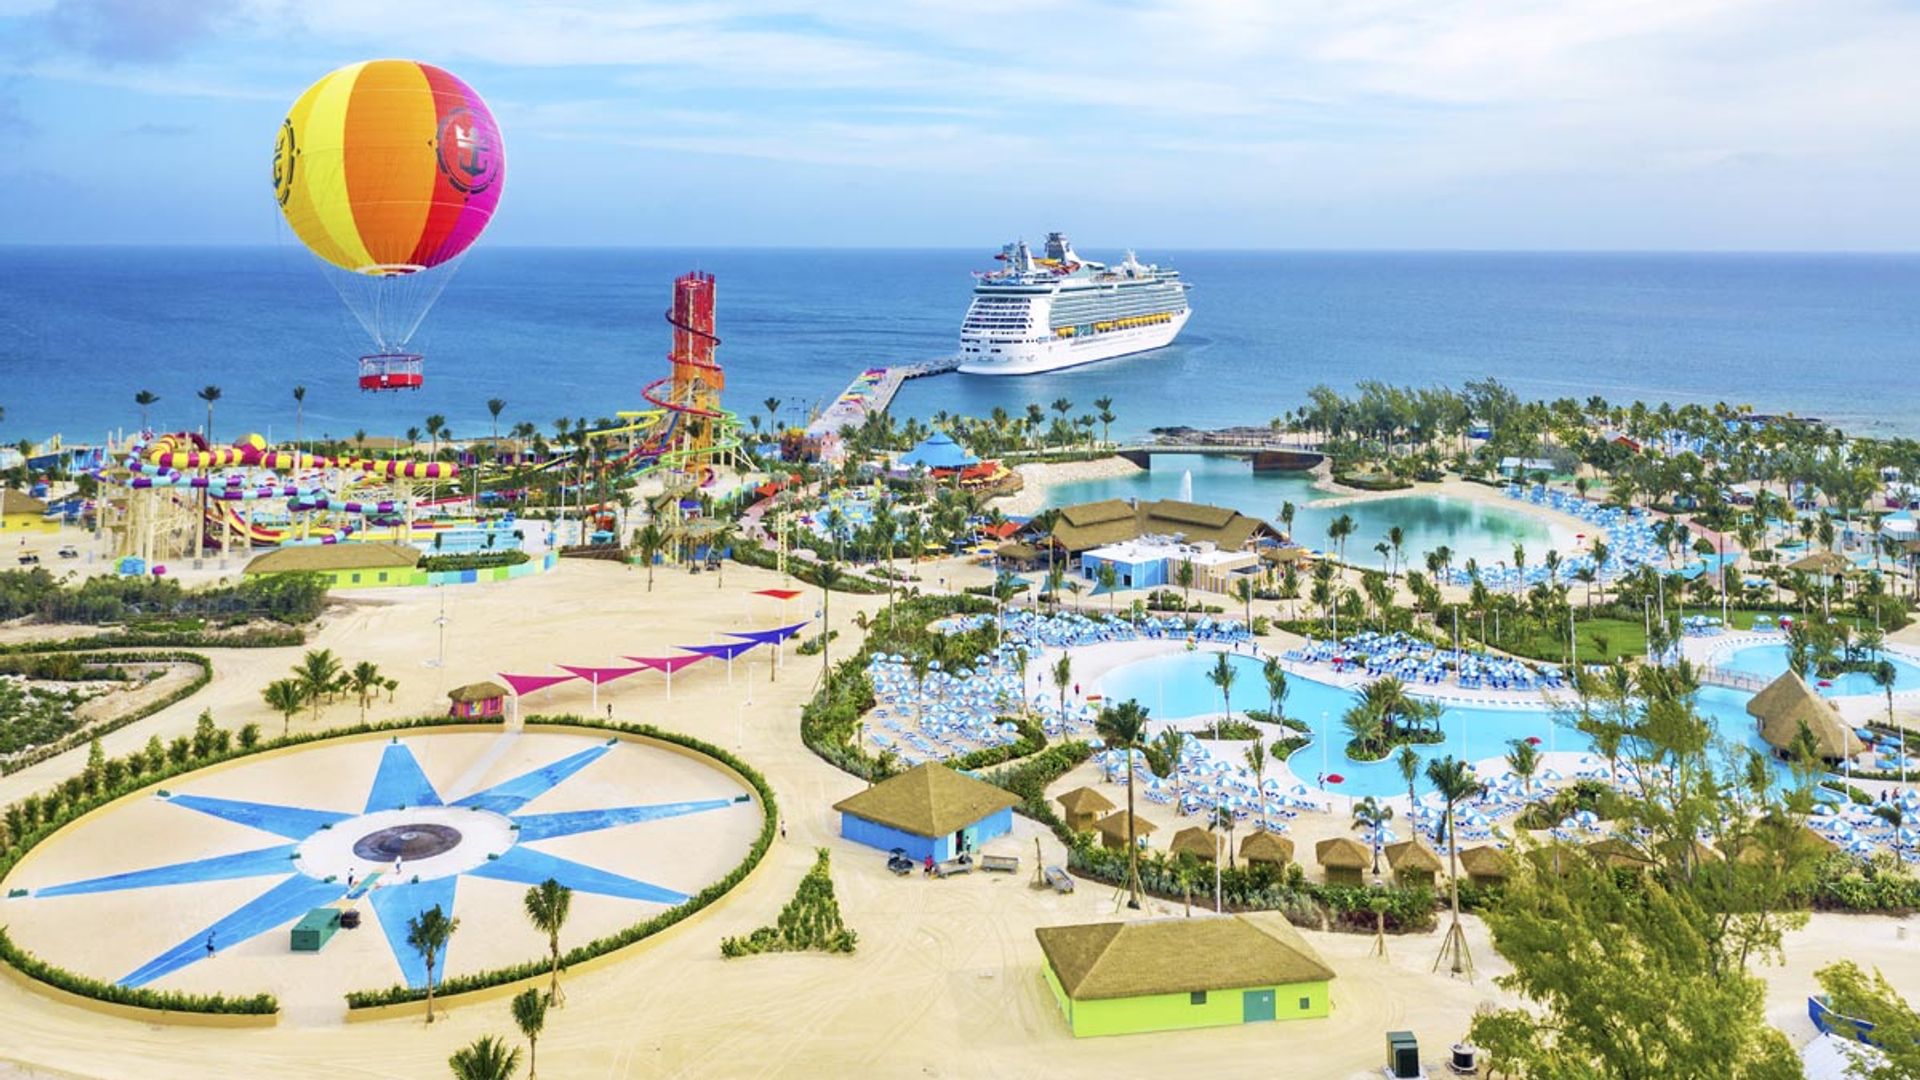 Why this exclusive Bahamas waterpark should be top of your bucket list – plus tips for first-time cruisers